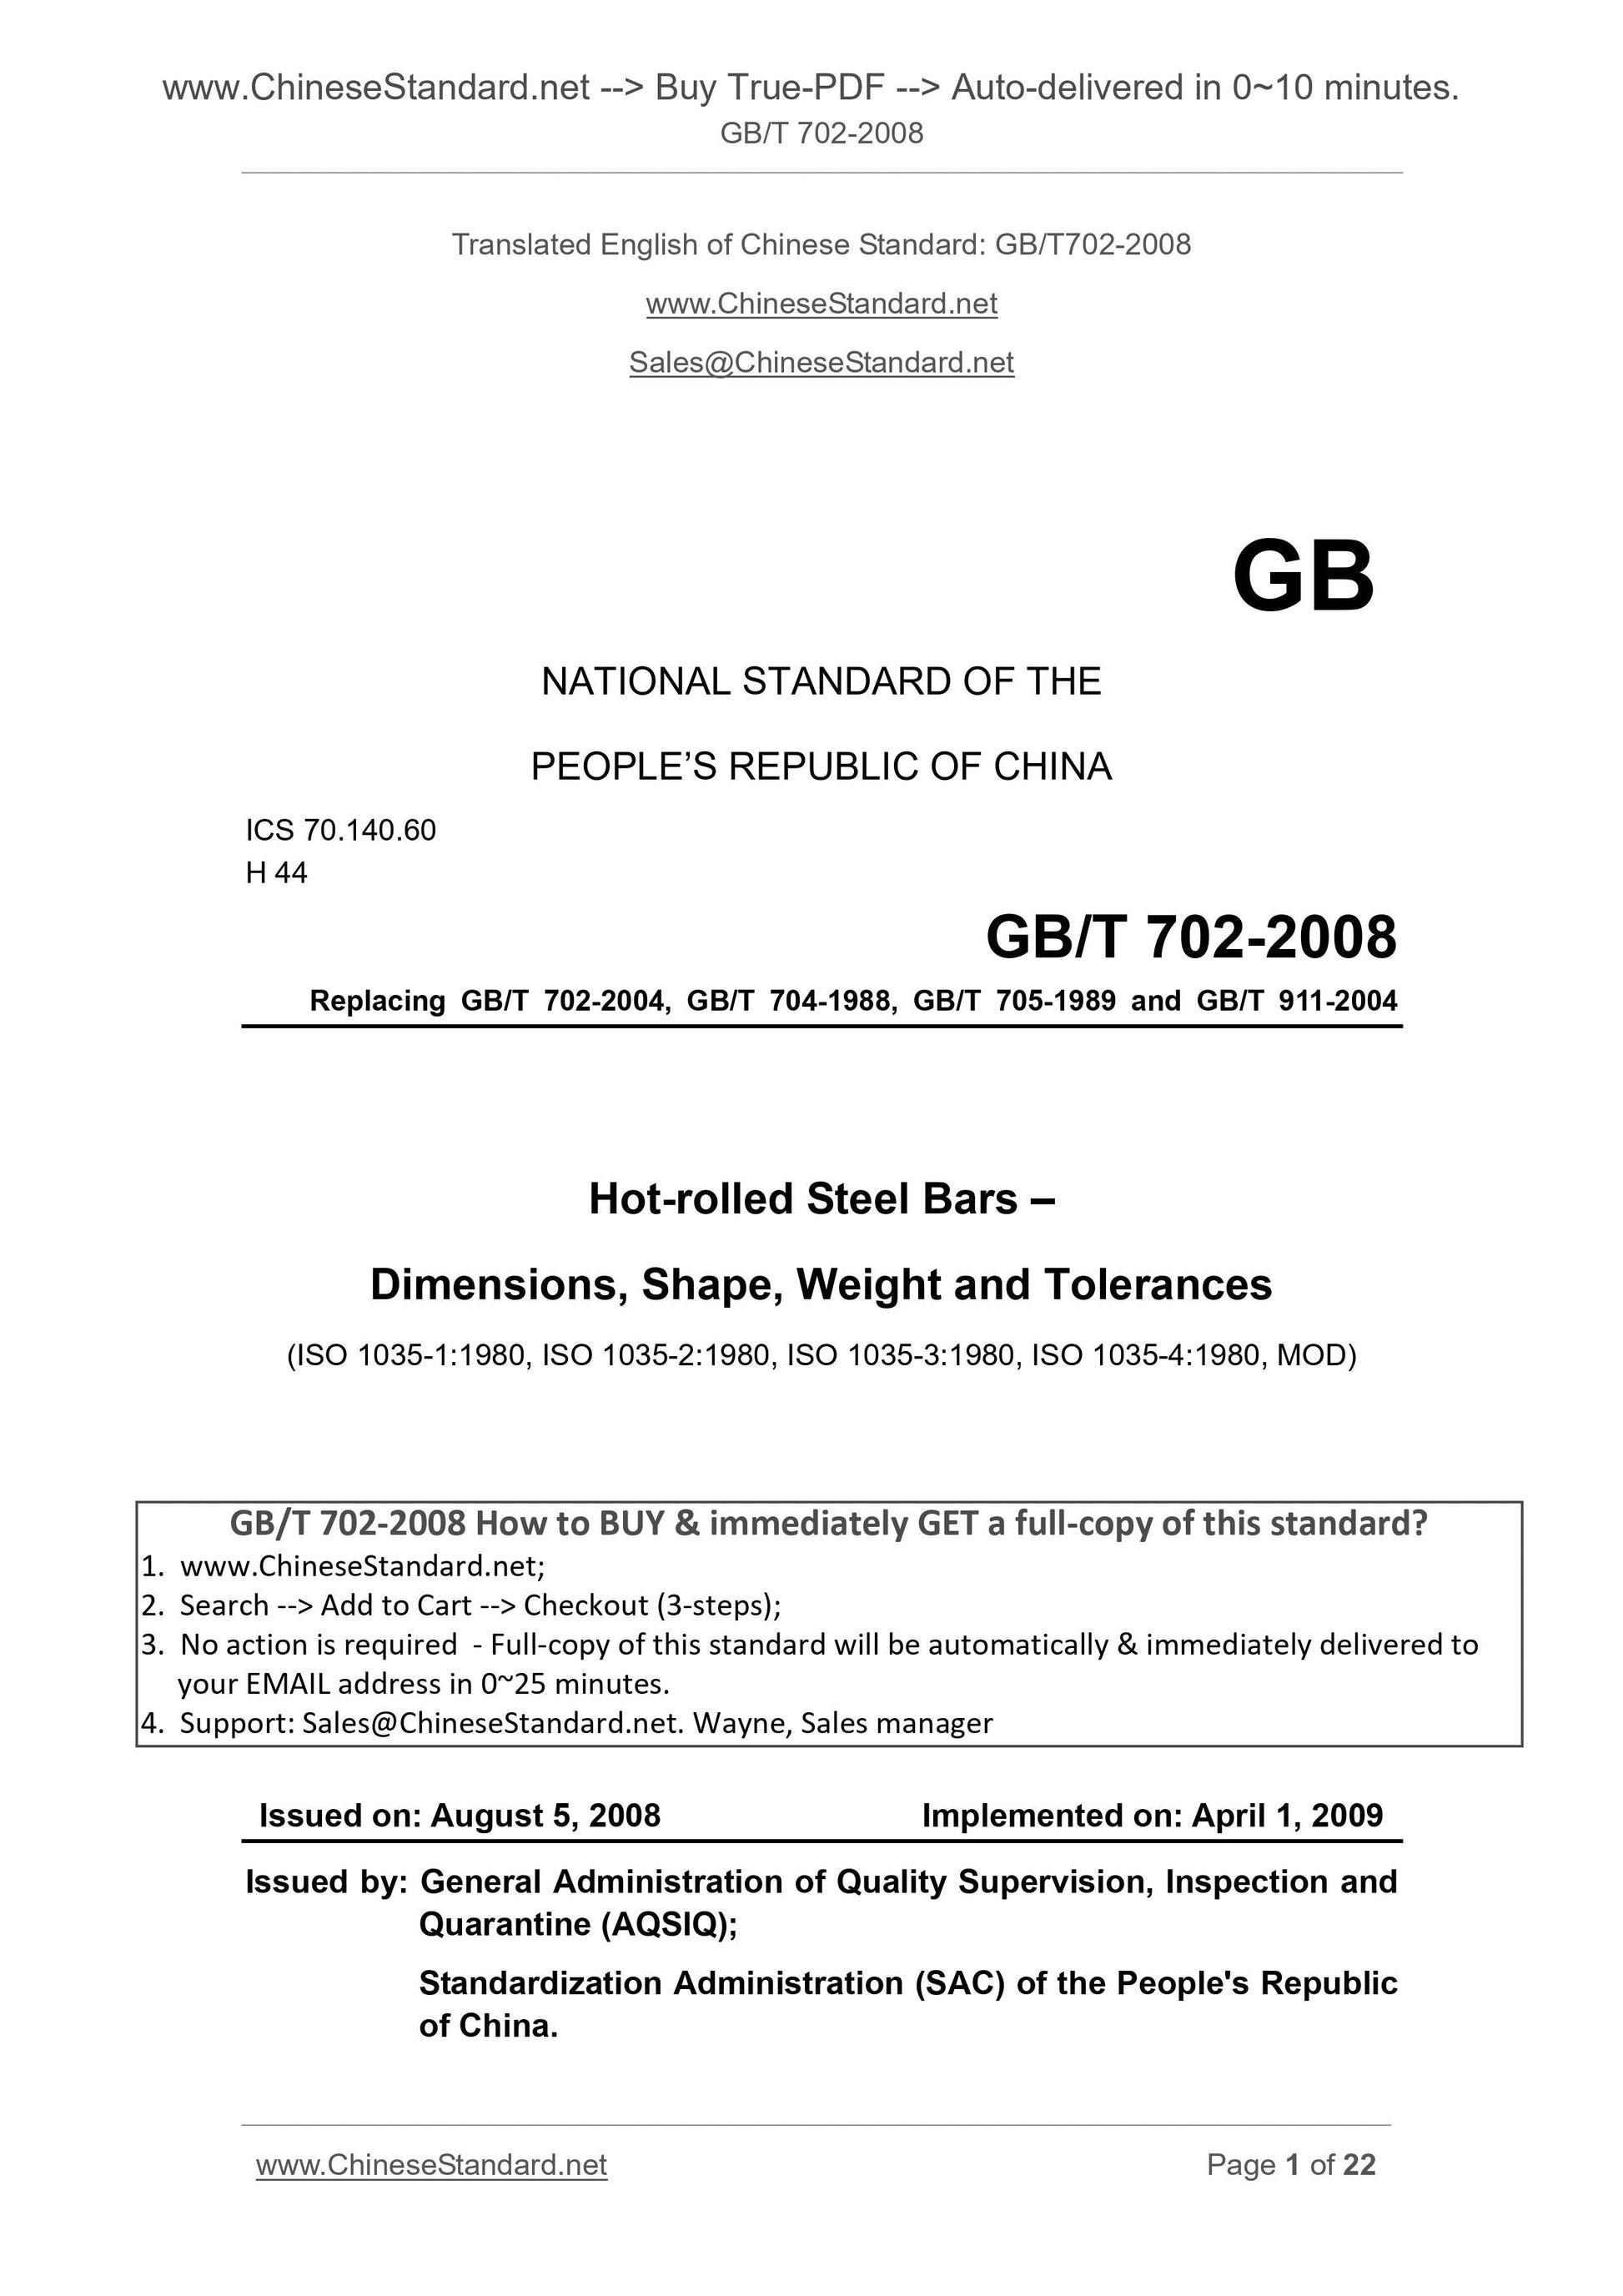 GB/T 702-2008 Page 1